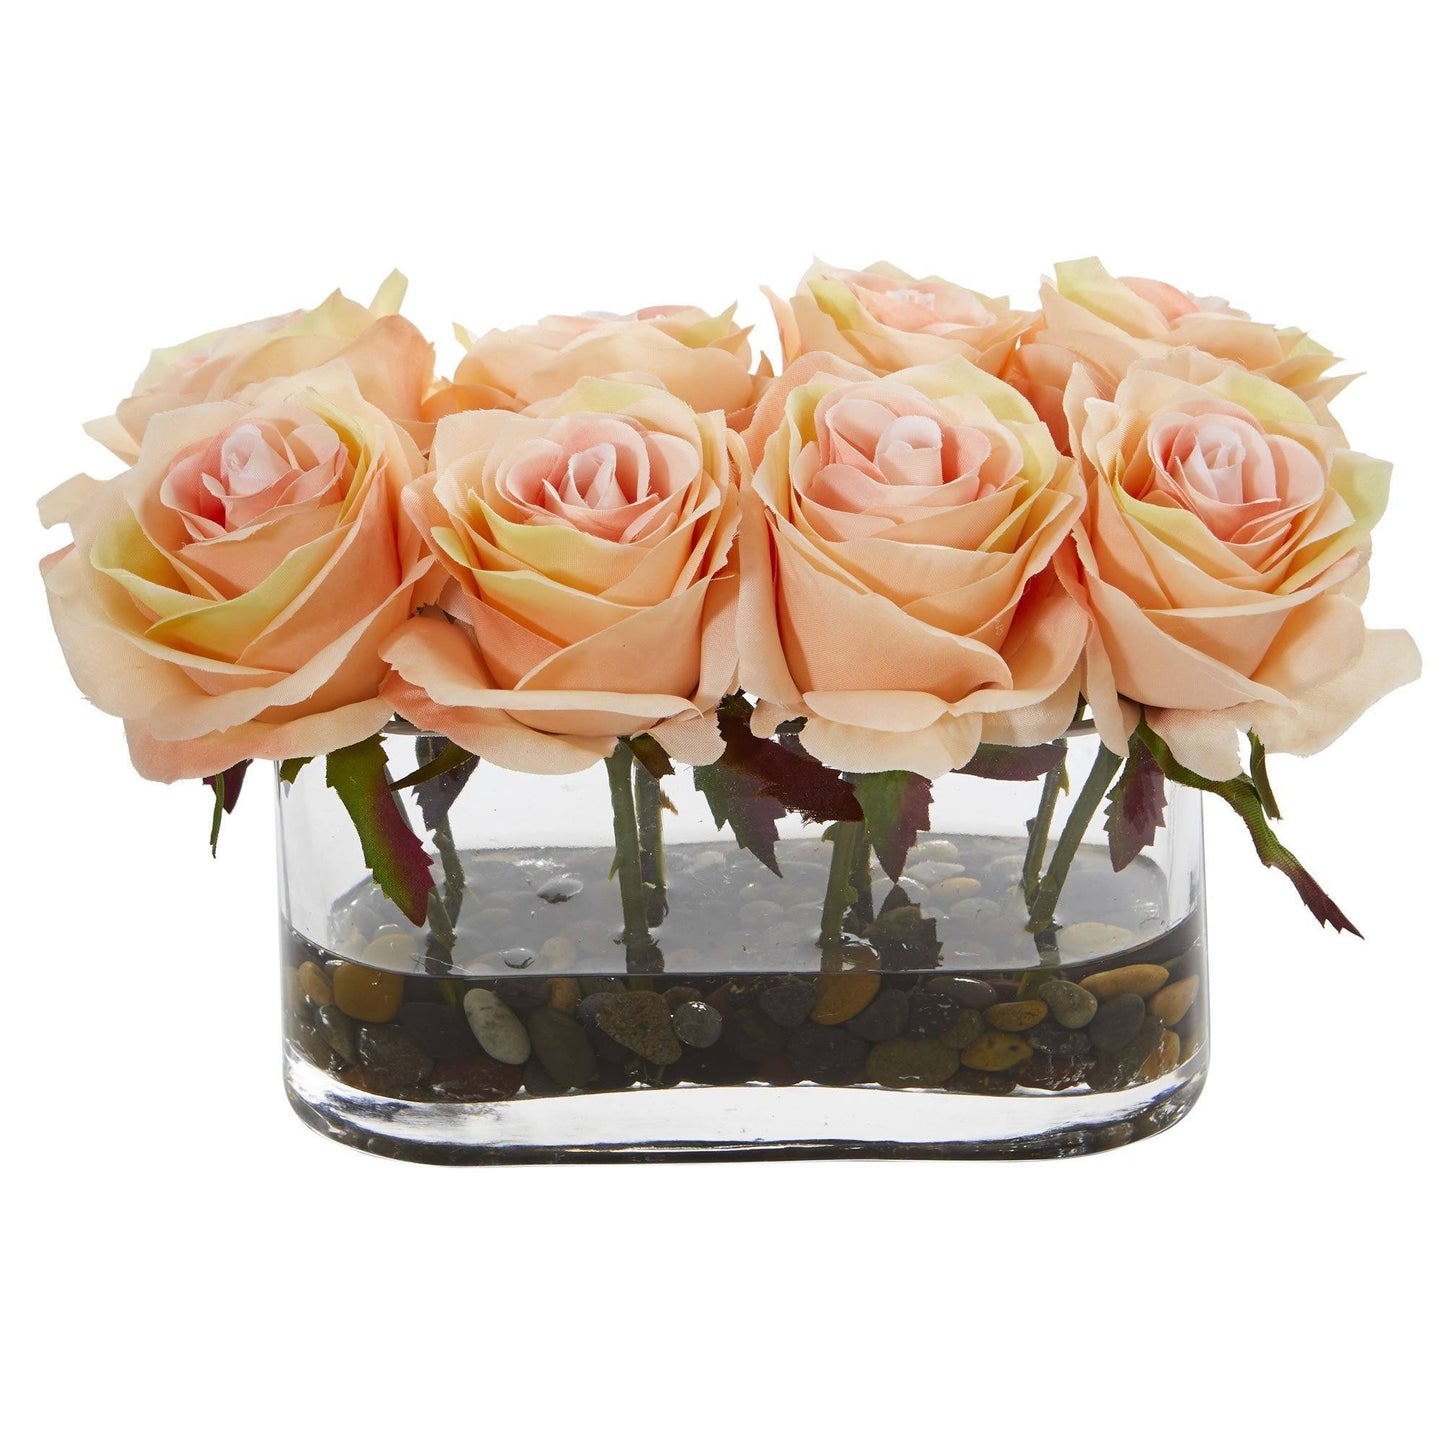 5.5” Blooming Roses in Glass Vase Artificial Arrangement by Nearly Natural